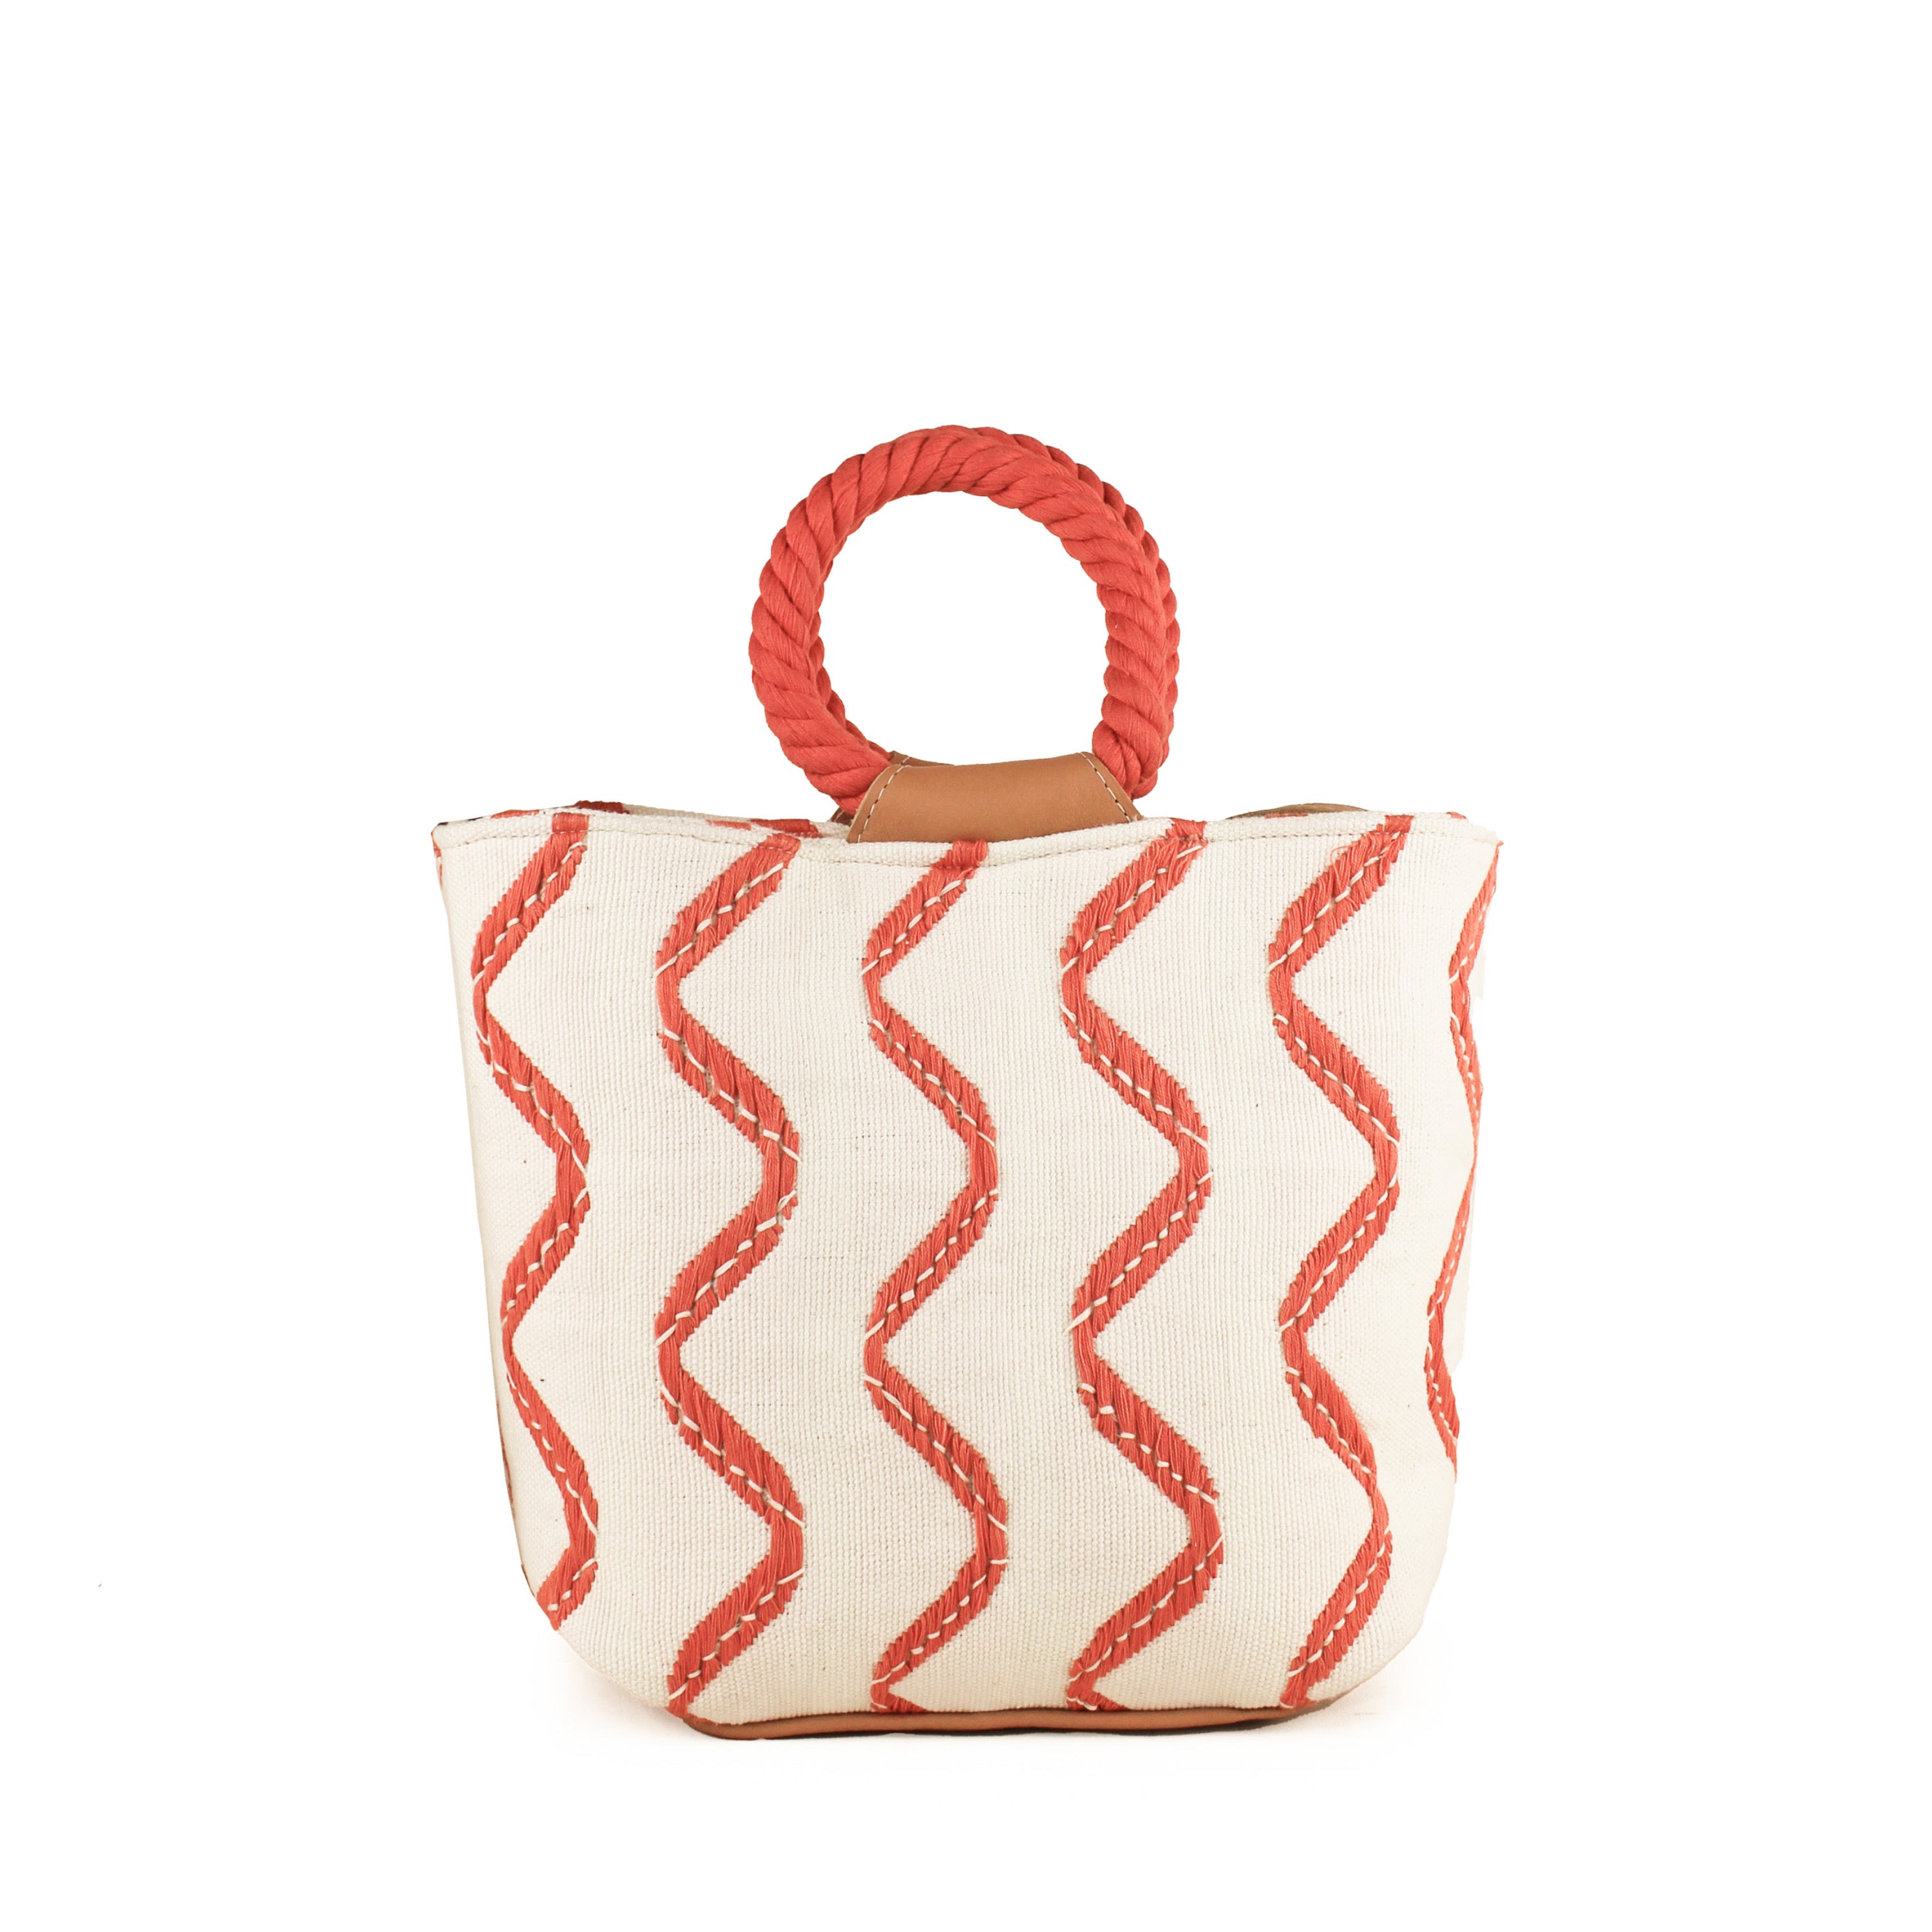 Hand woven artisan Dalila Midi Tote in Heatwaves pattern. The bag has coiled round orange handles. The Heatwaves pattern has vertical wavy orange stripes.